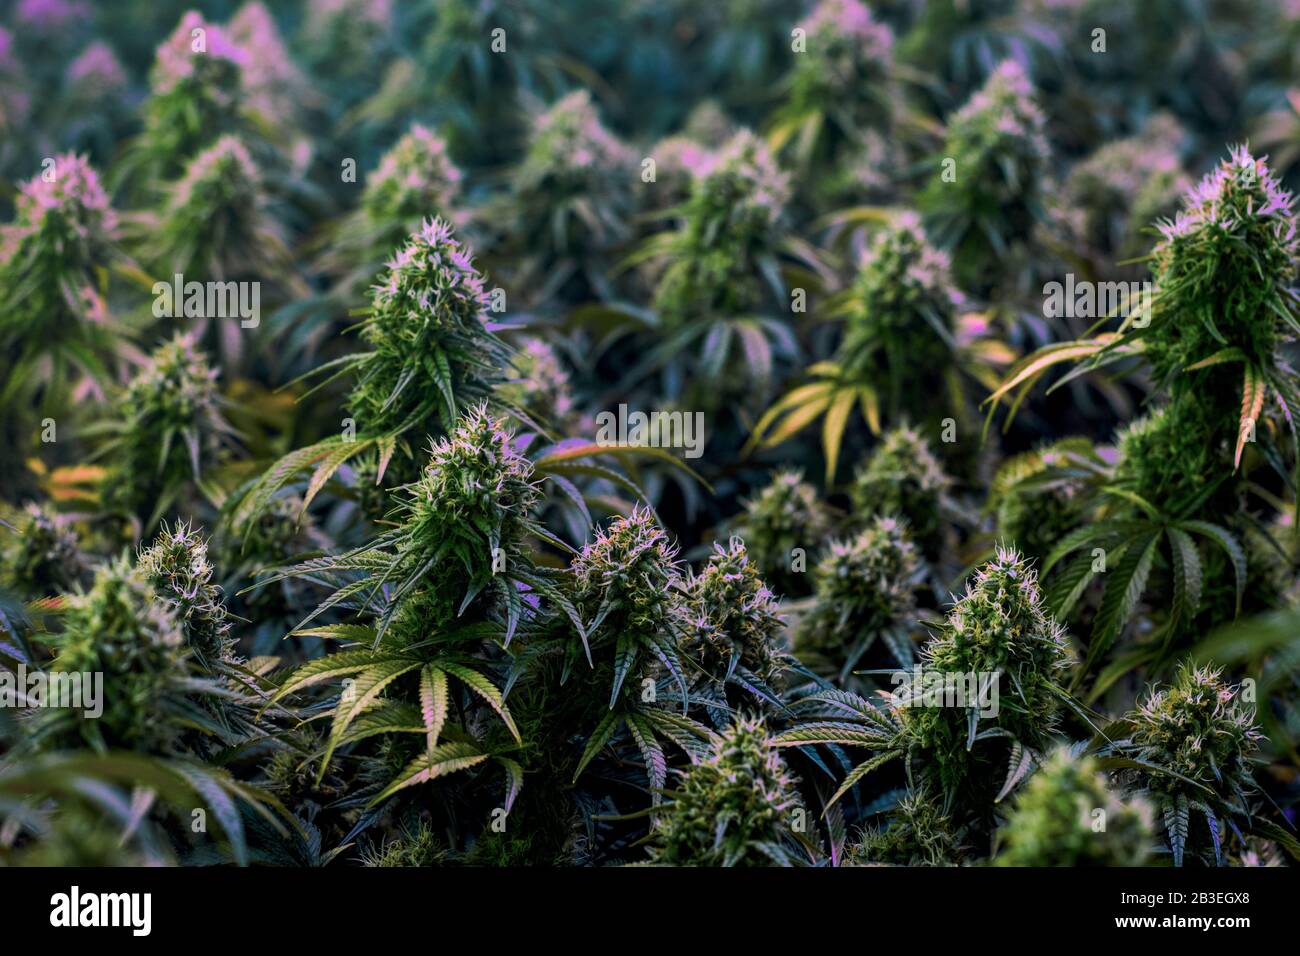 Multiple mature indoor medical recreational marijuana cannabis industry plants with large developed cola flowers Stock Photo